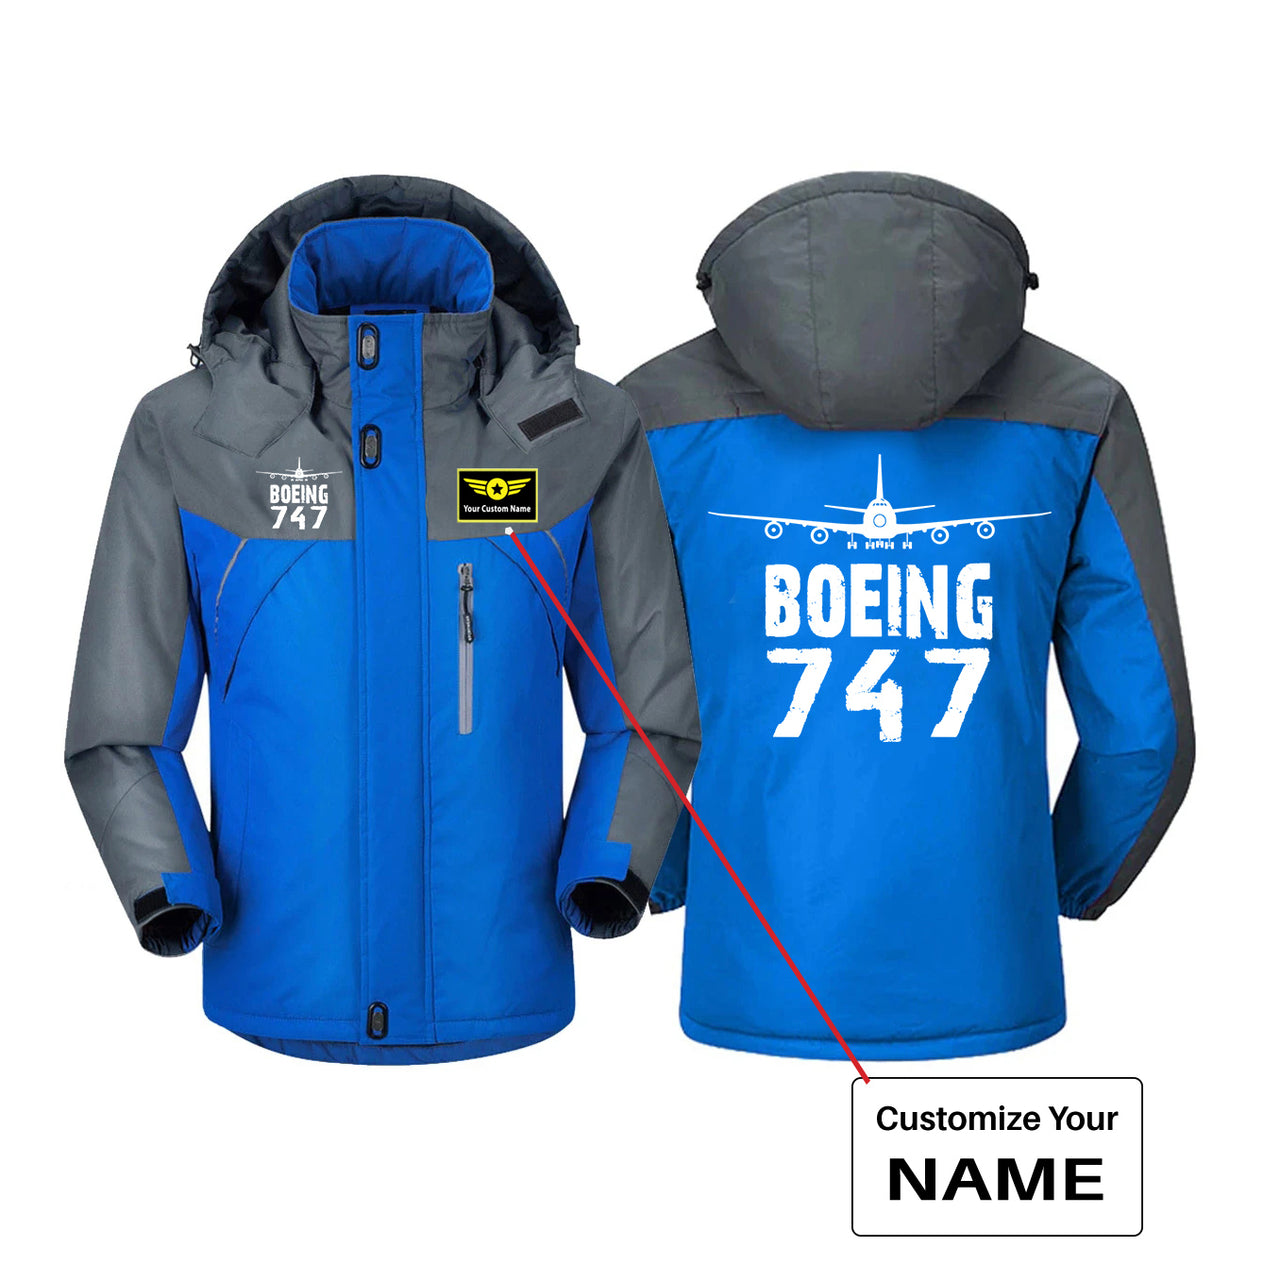 Boeing 747 & Plane Designed Thick Winter Jackets